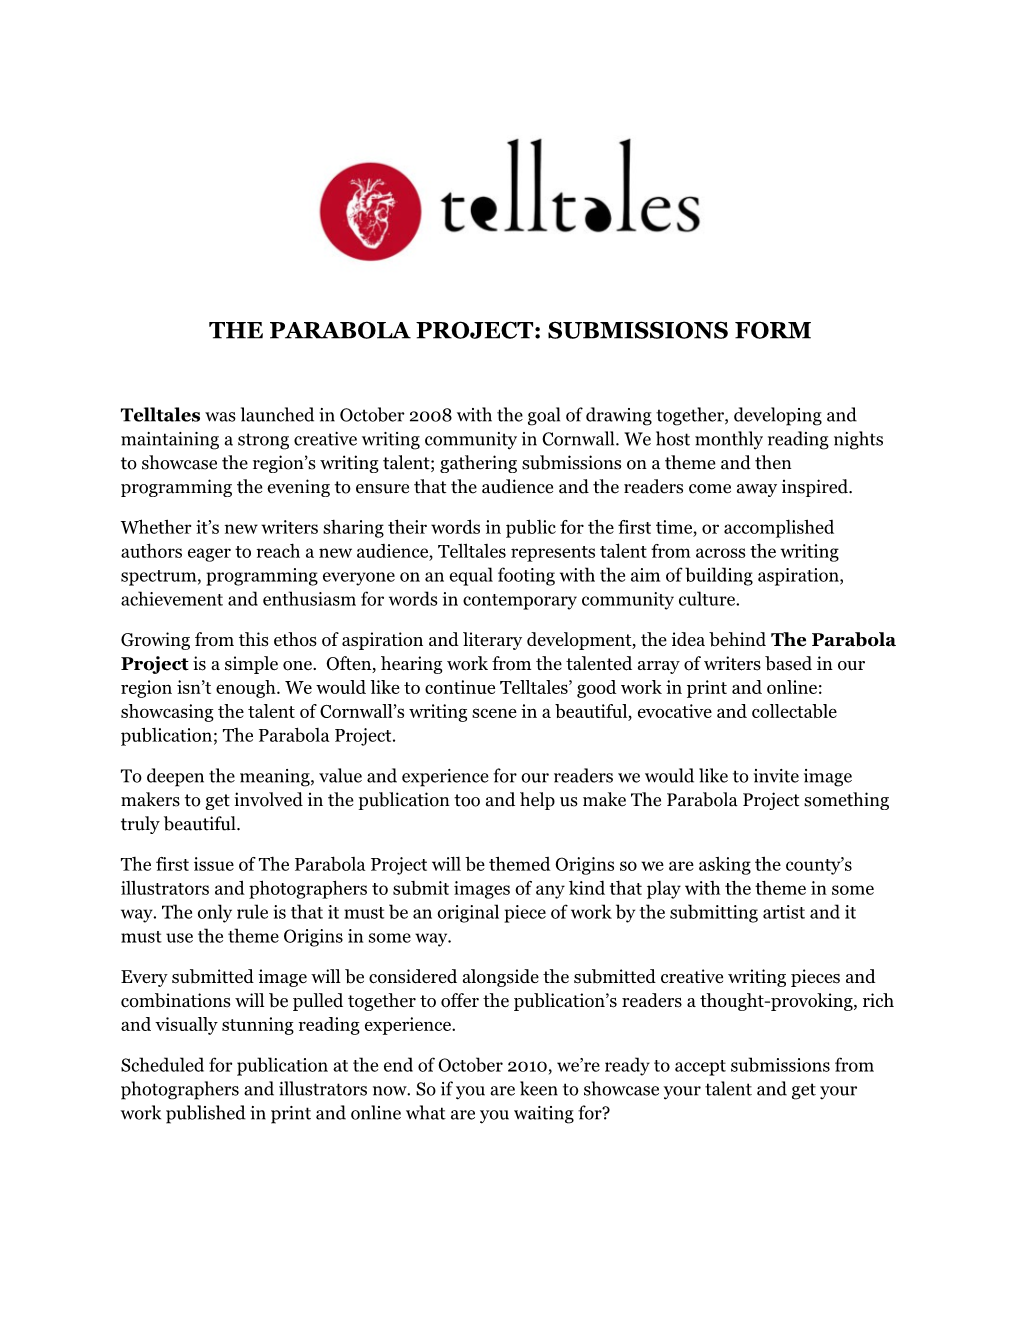 The Parabola Project: Submissions Form